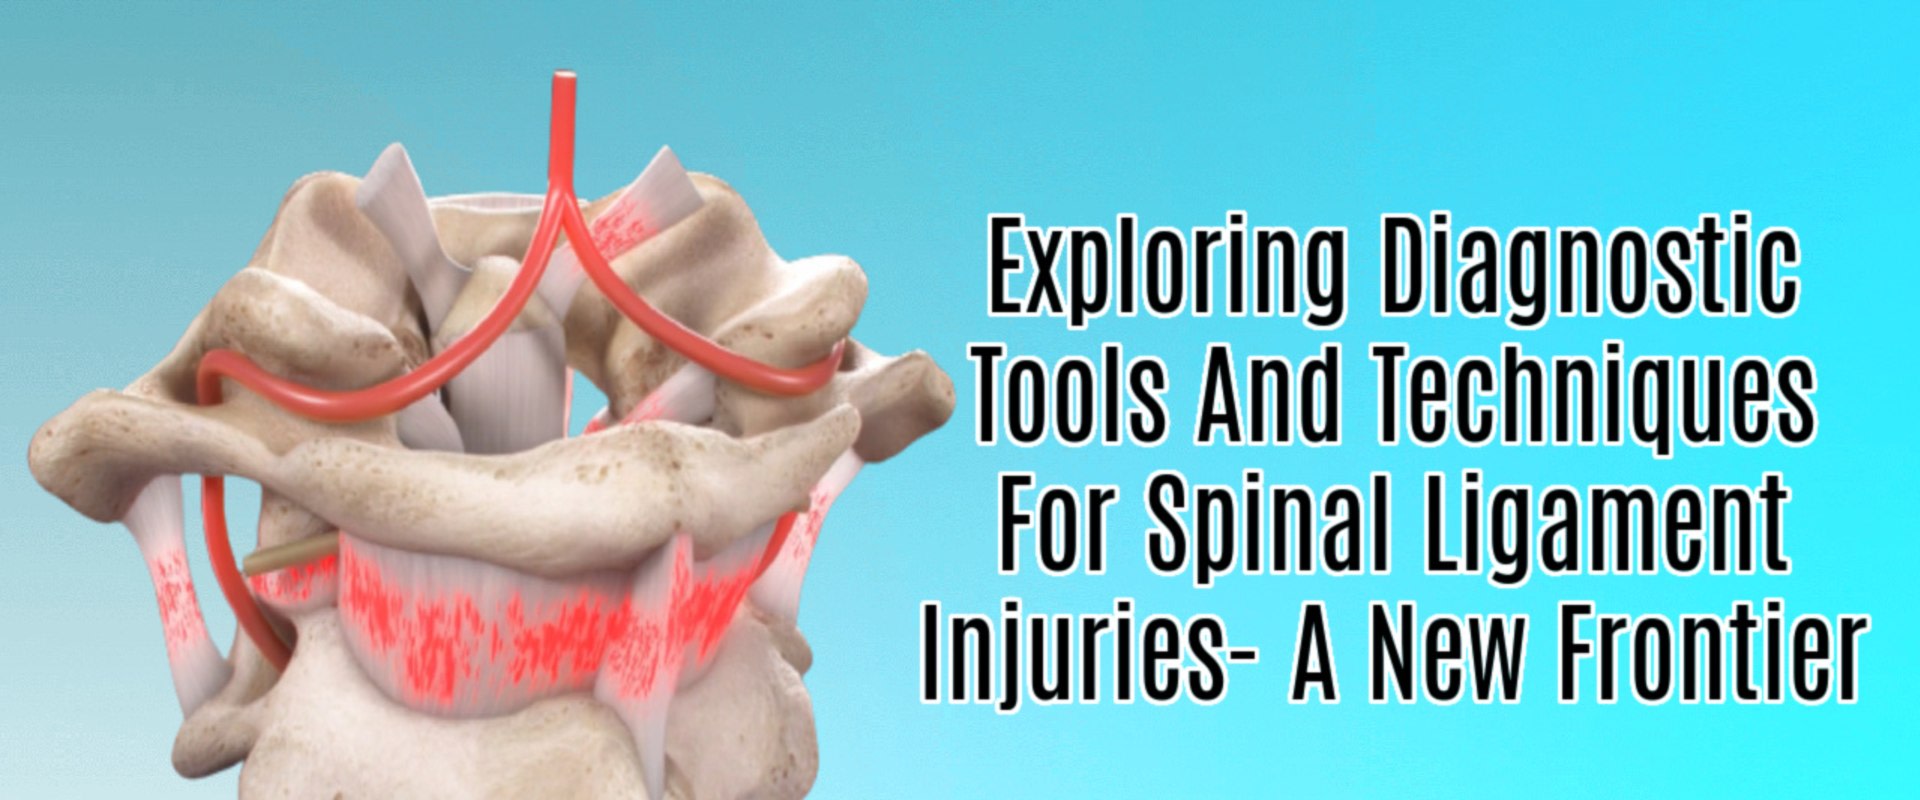 A New Frontier For Spinal Ligament Injury Diagnosis